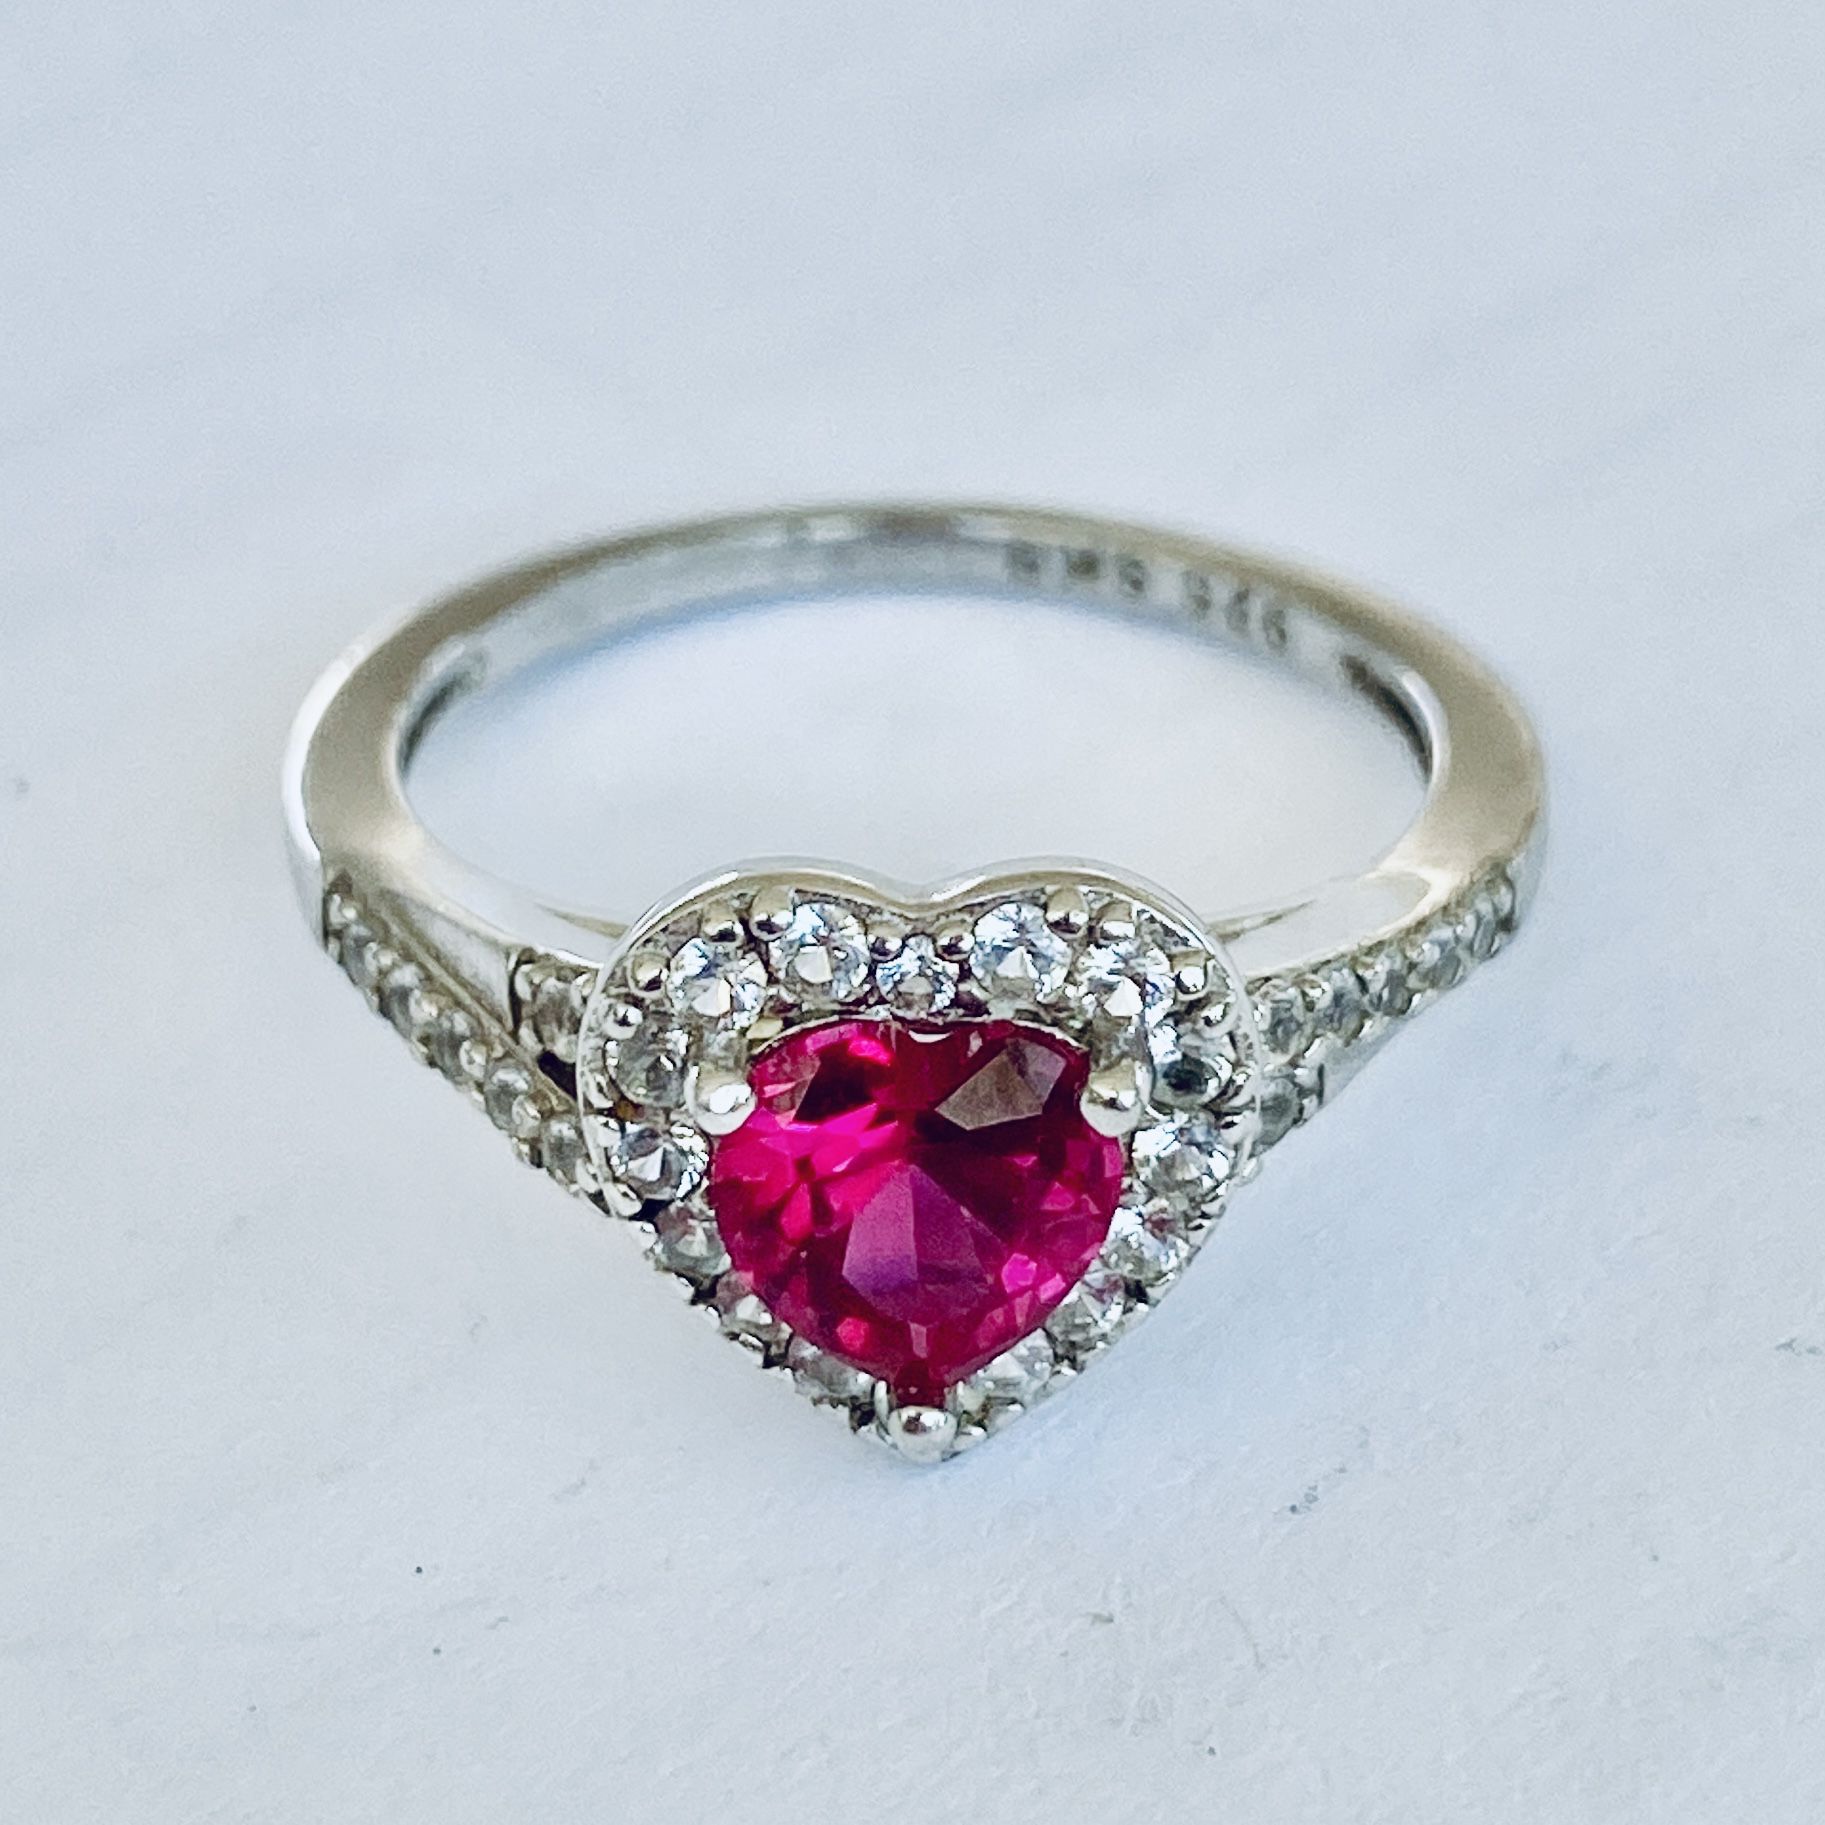 Mejuri 925 Sterling Silver SK9 Diamond Ring With Elegant Heart-Shape Ruby